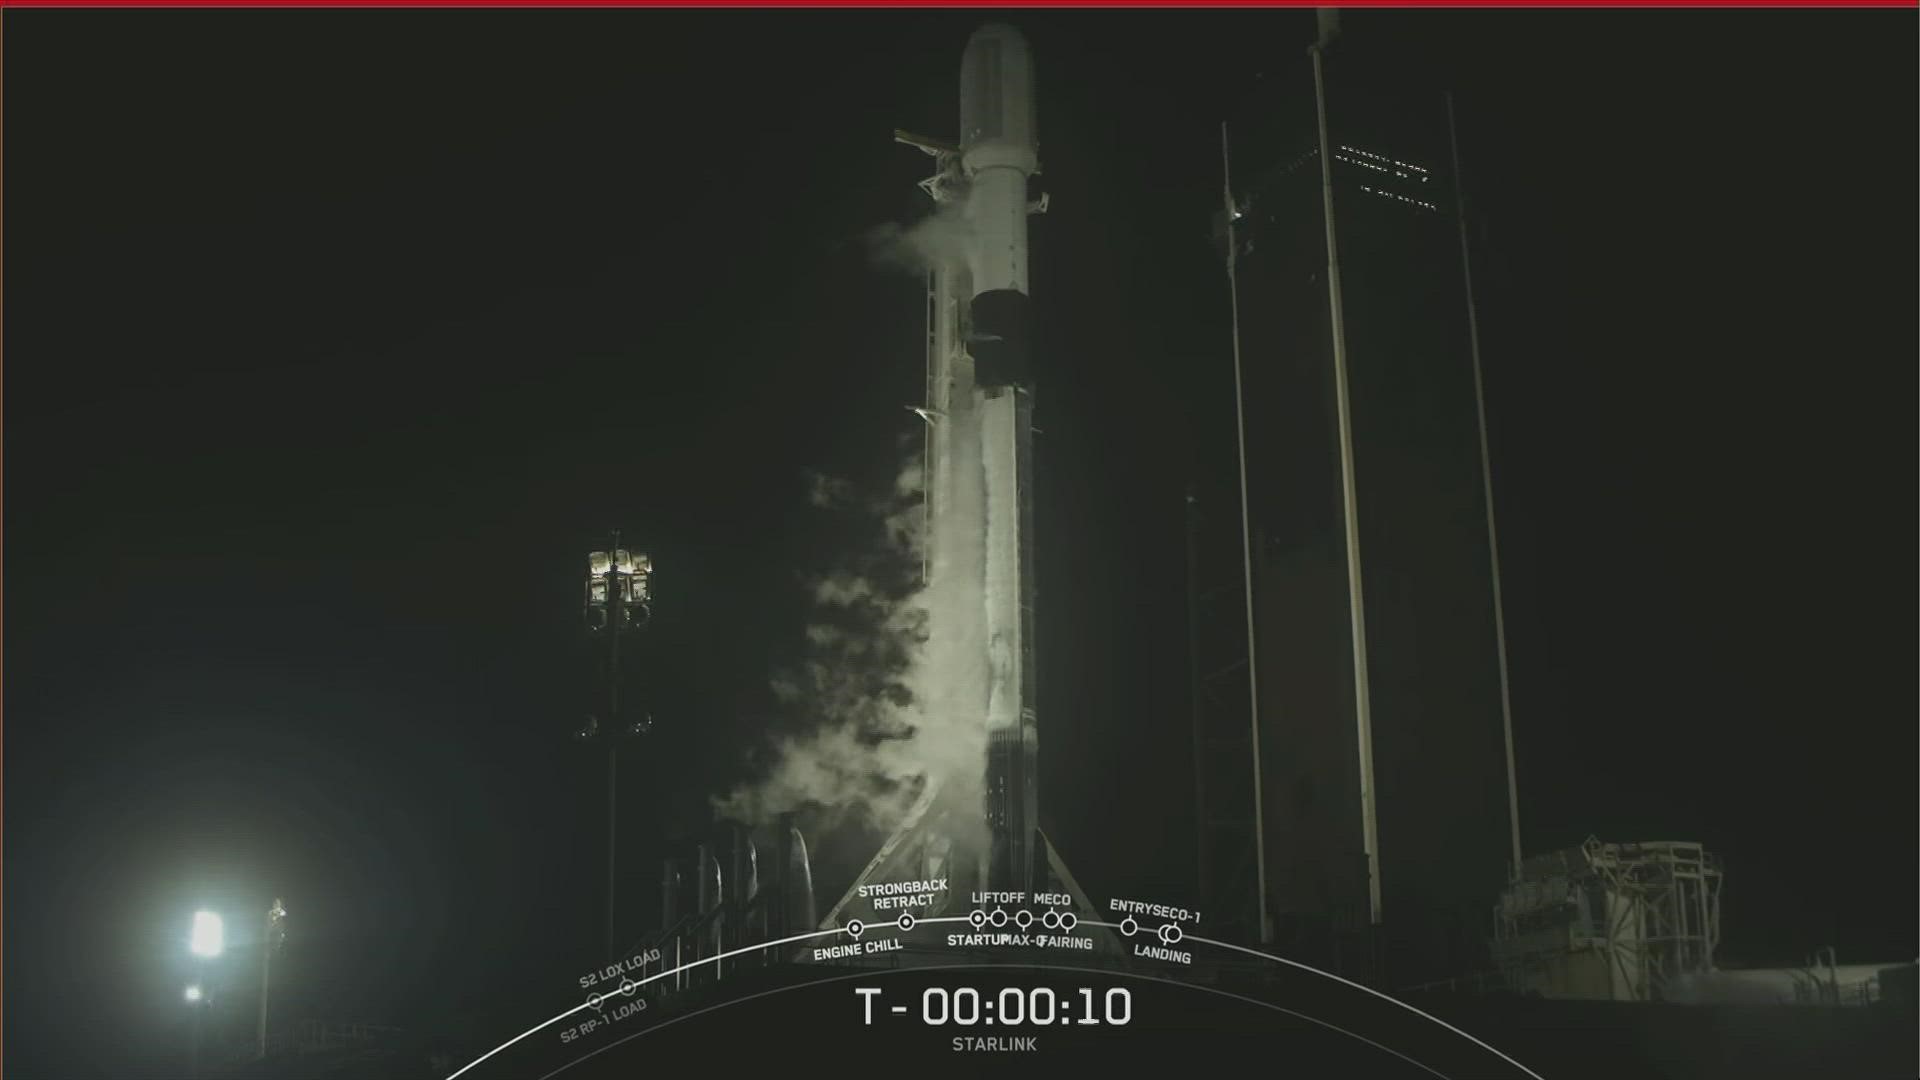 SpaceX Falcon 9 launches out of Cape Canaveral at 9:20 p.m. Saturday, September 10.